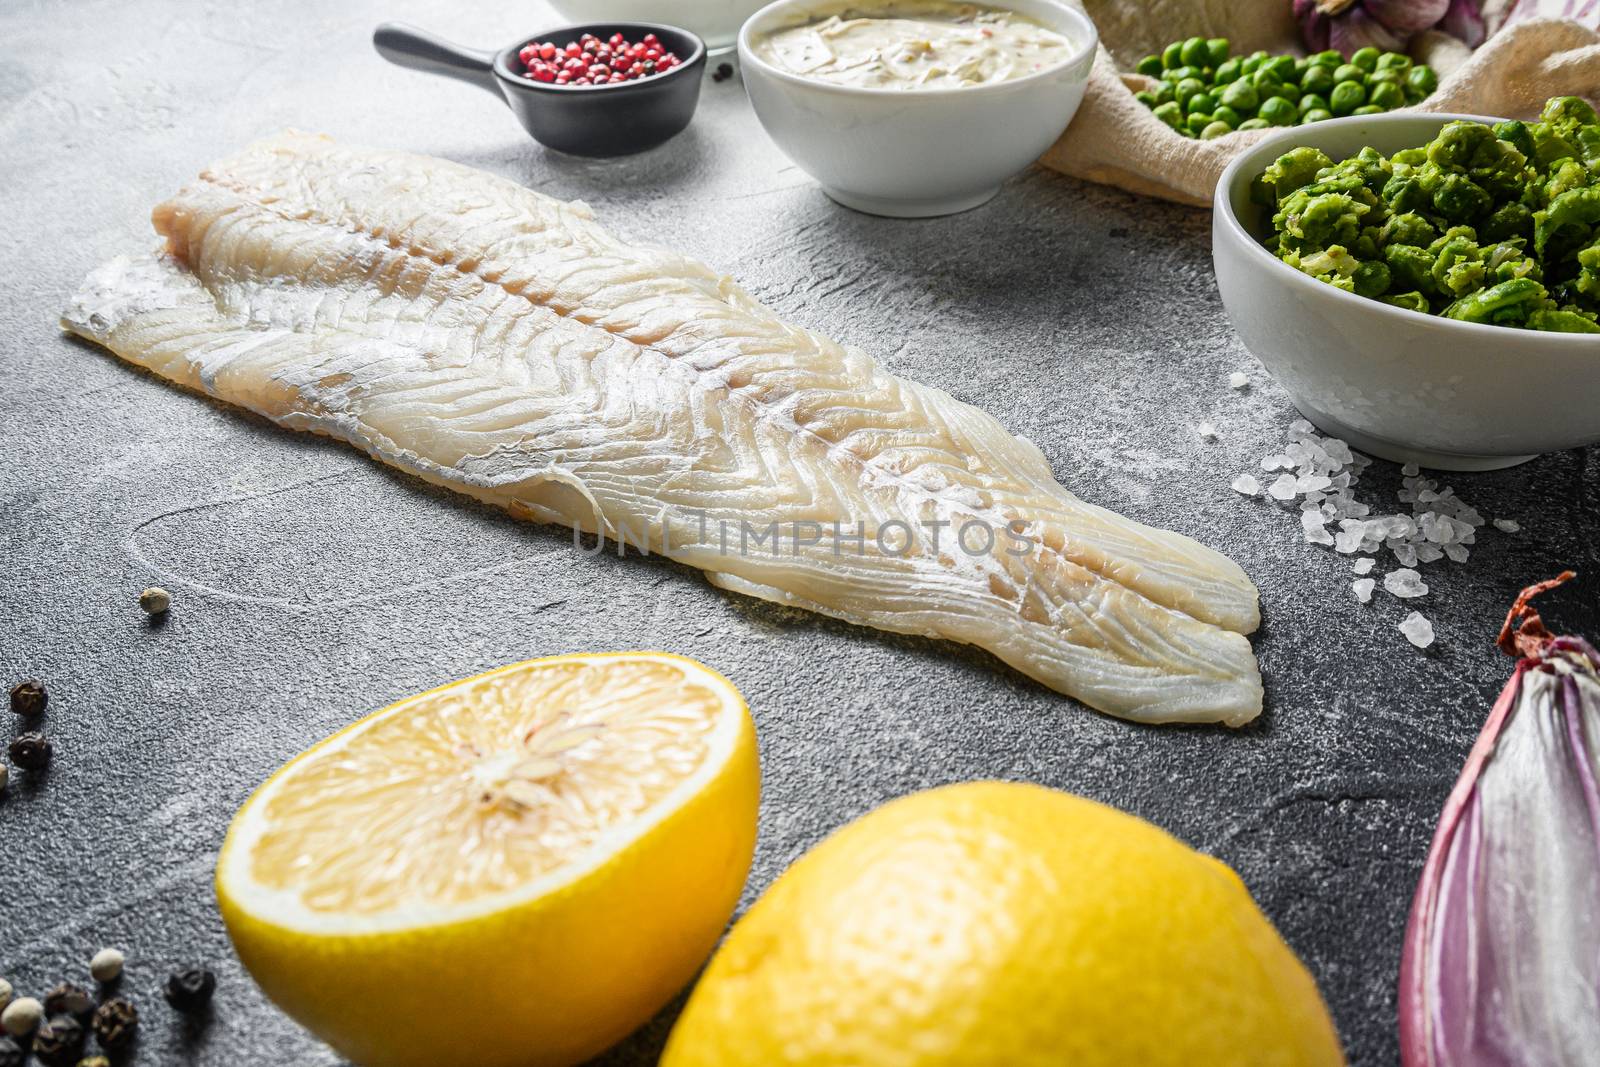 Cod fish for english traditional Fish and chips ingredients beer batter, potatoe, tartar sauce, minty mushy peas, lemon , shallot, mint, garlic, salt, peppercorns, cod fish side view grey concrete background new wide angel. by Ilianesolenyi